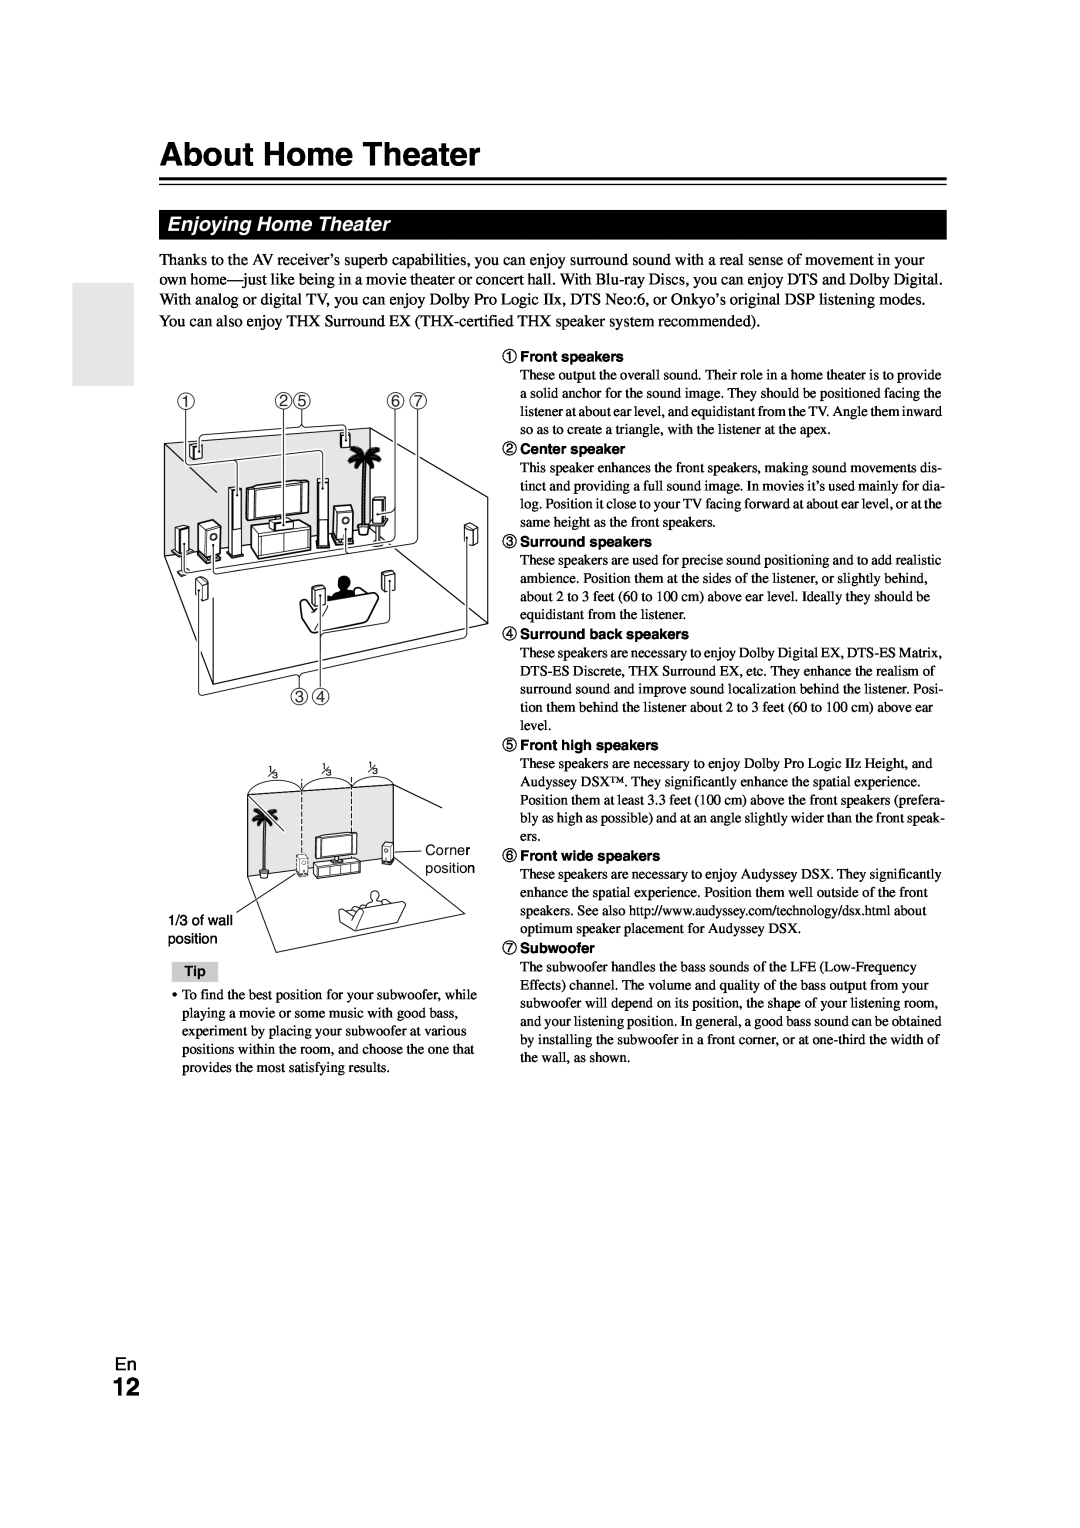 Onkyo SR608 instruction manual About Home Theater, Enjoying Home Theater, a be f g cd 